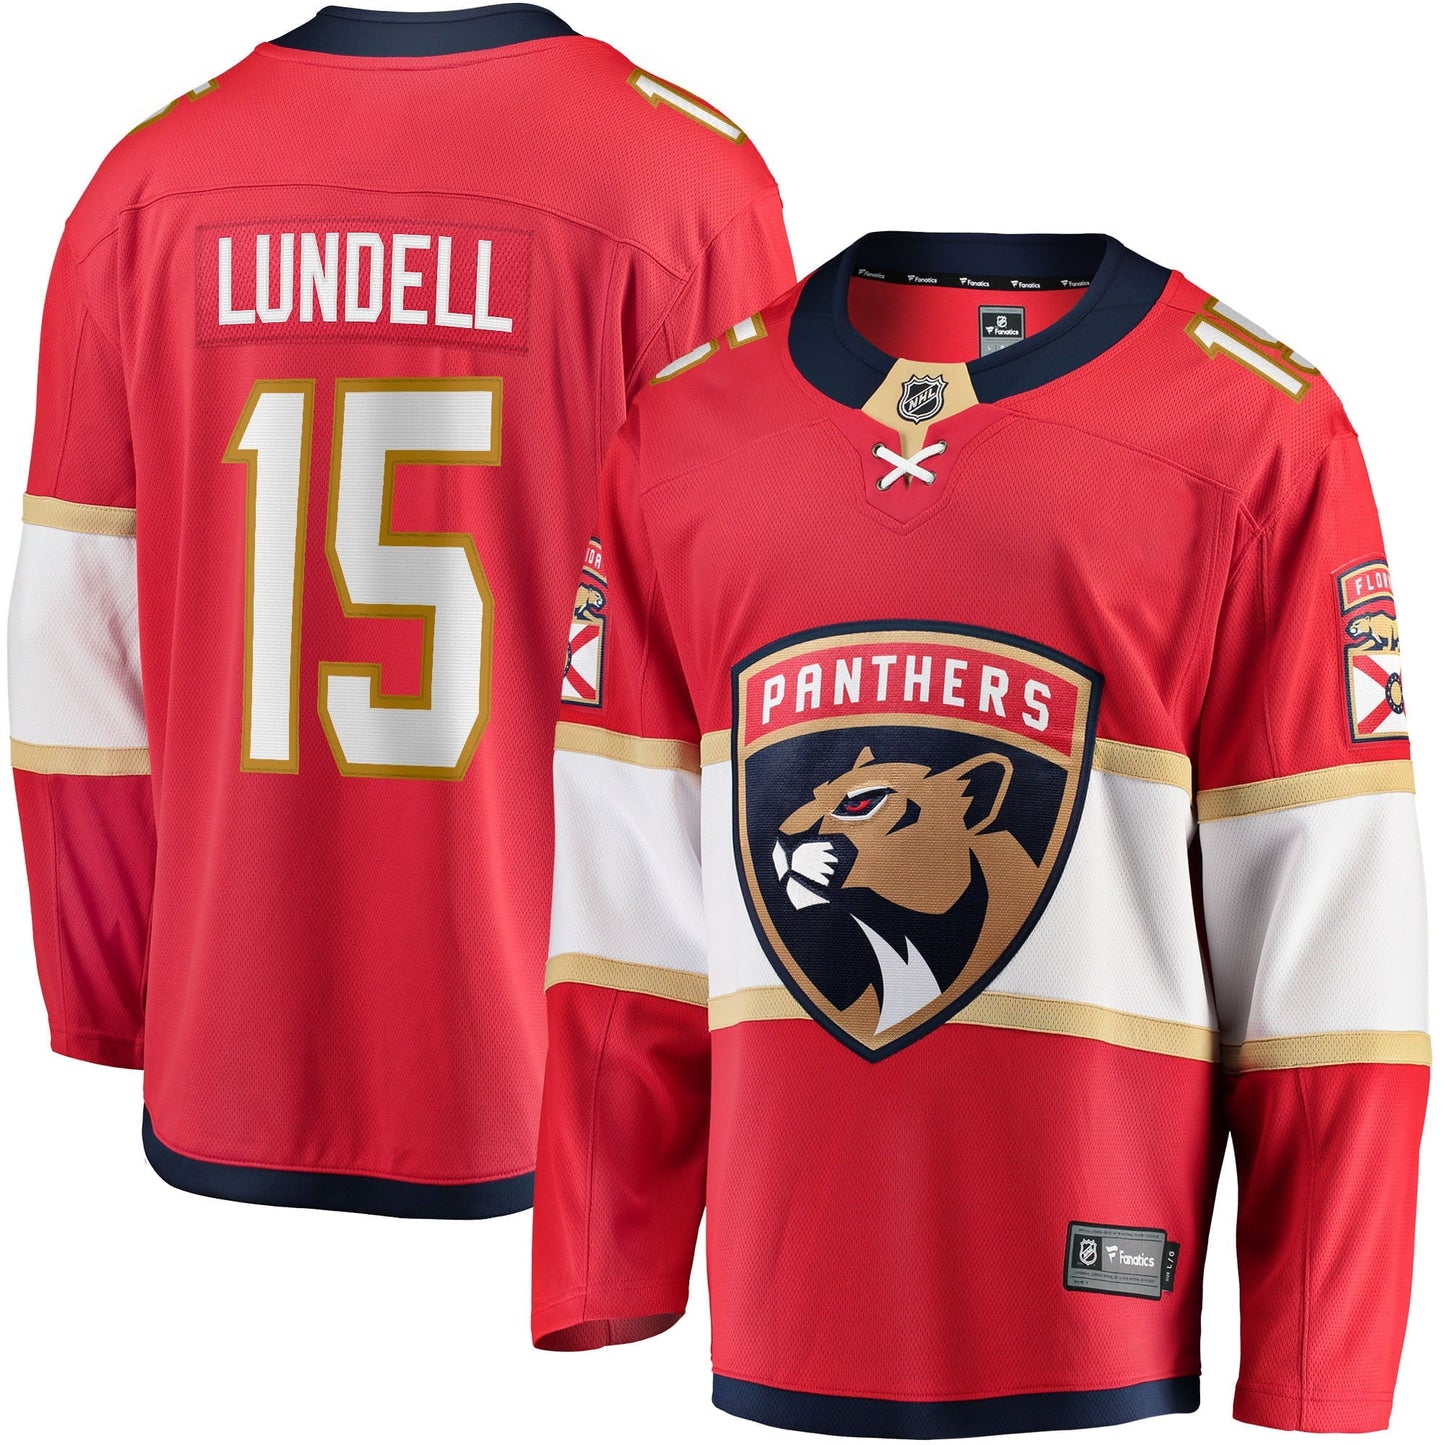 Men's Fanatics Branded Anton Lundell Red Florida Panthers Home Breakaway Player Jersey